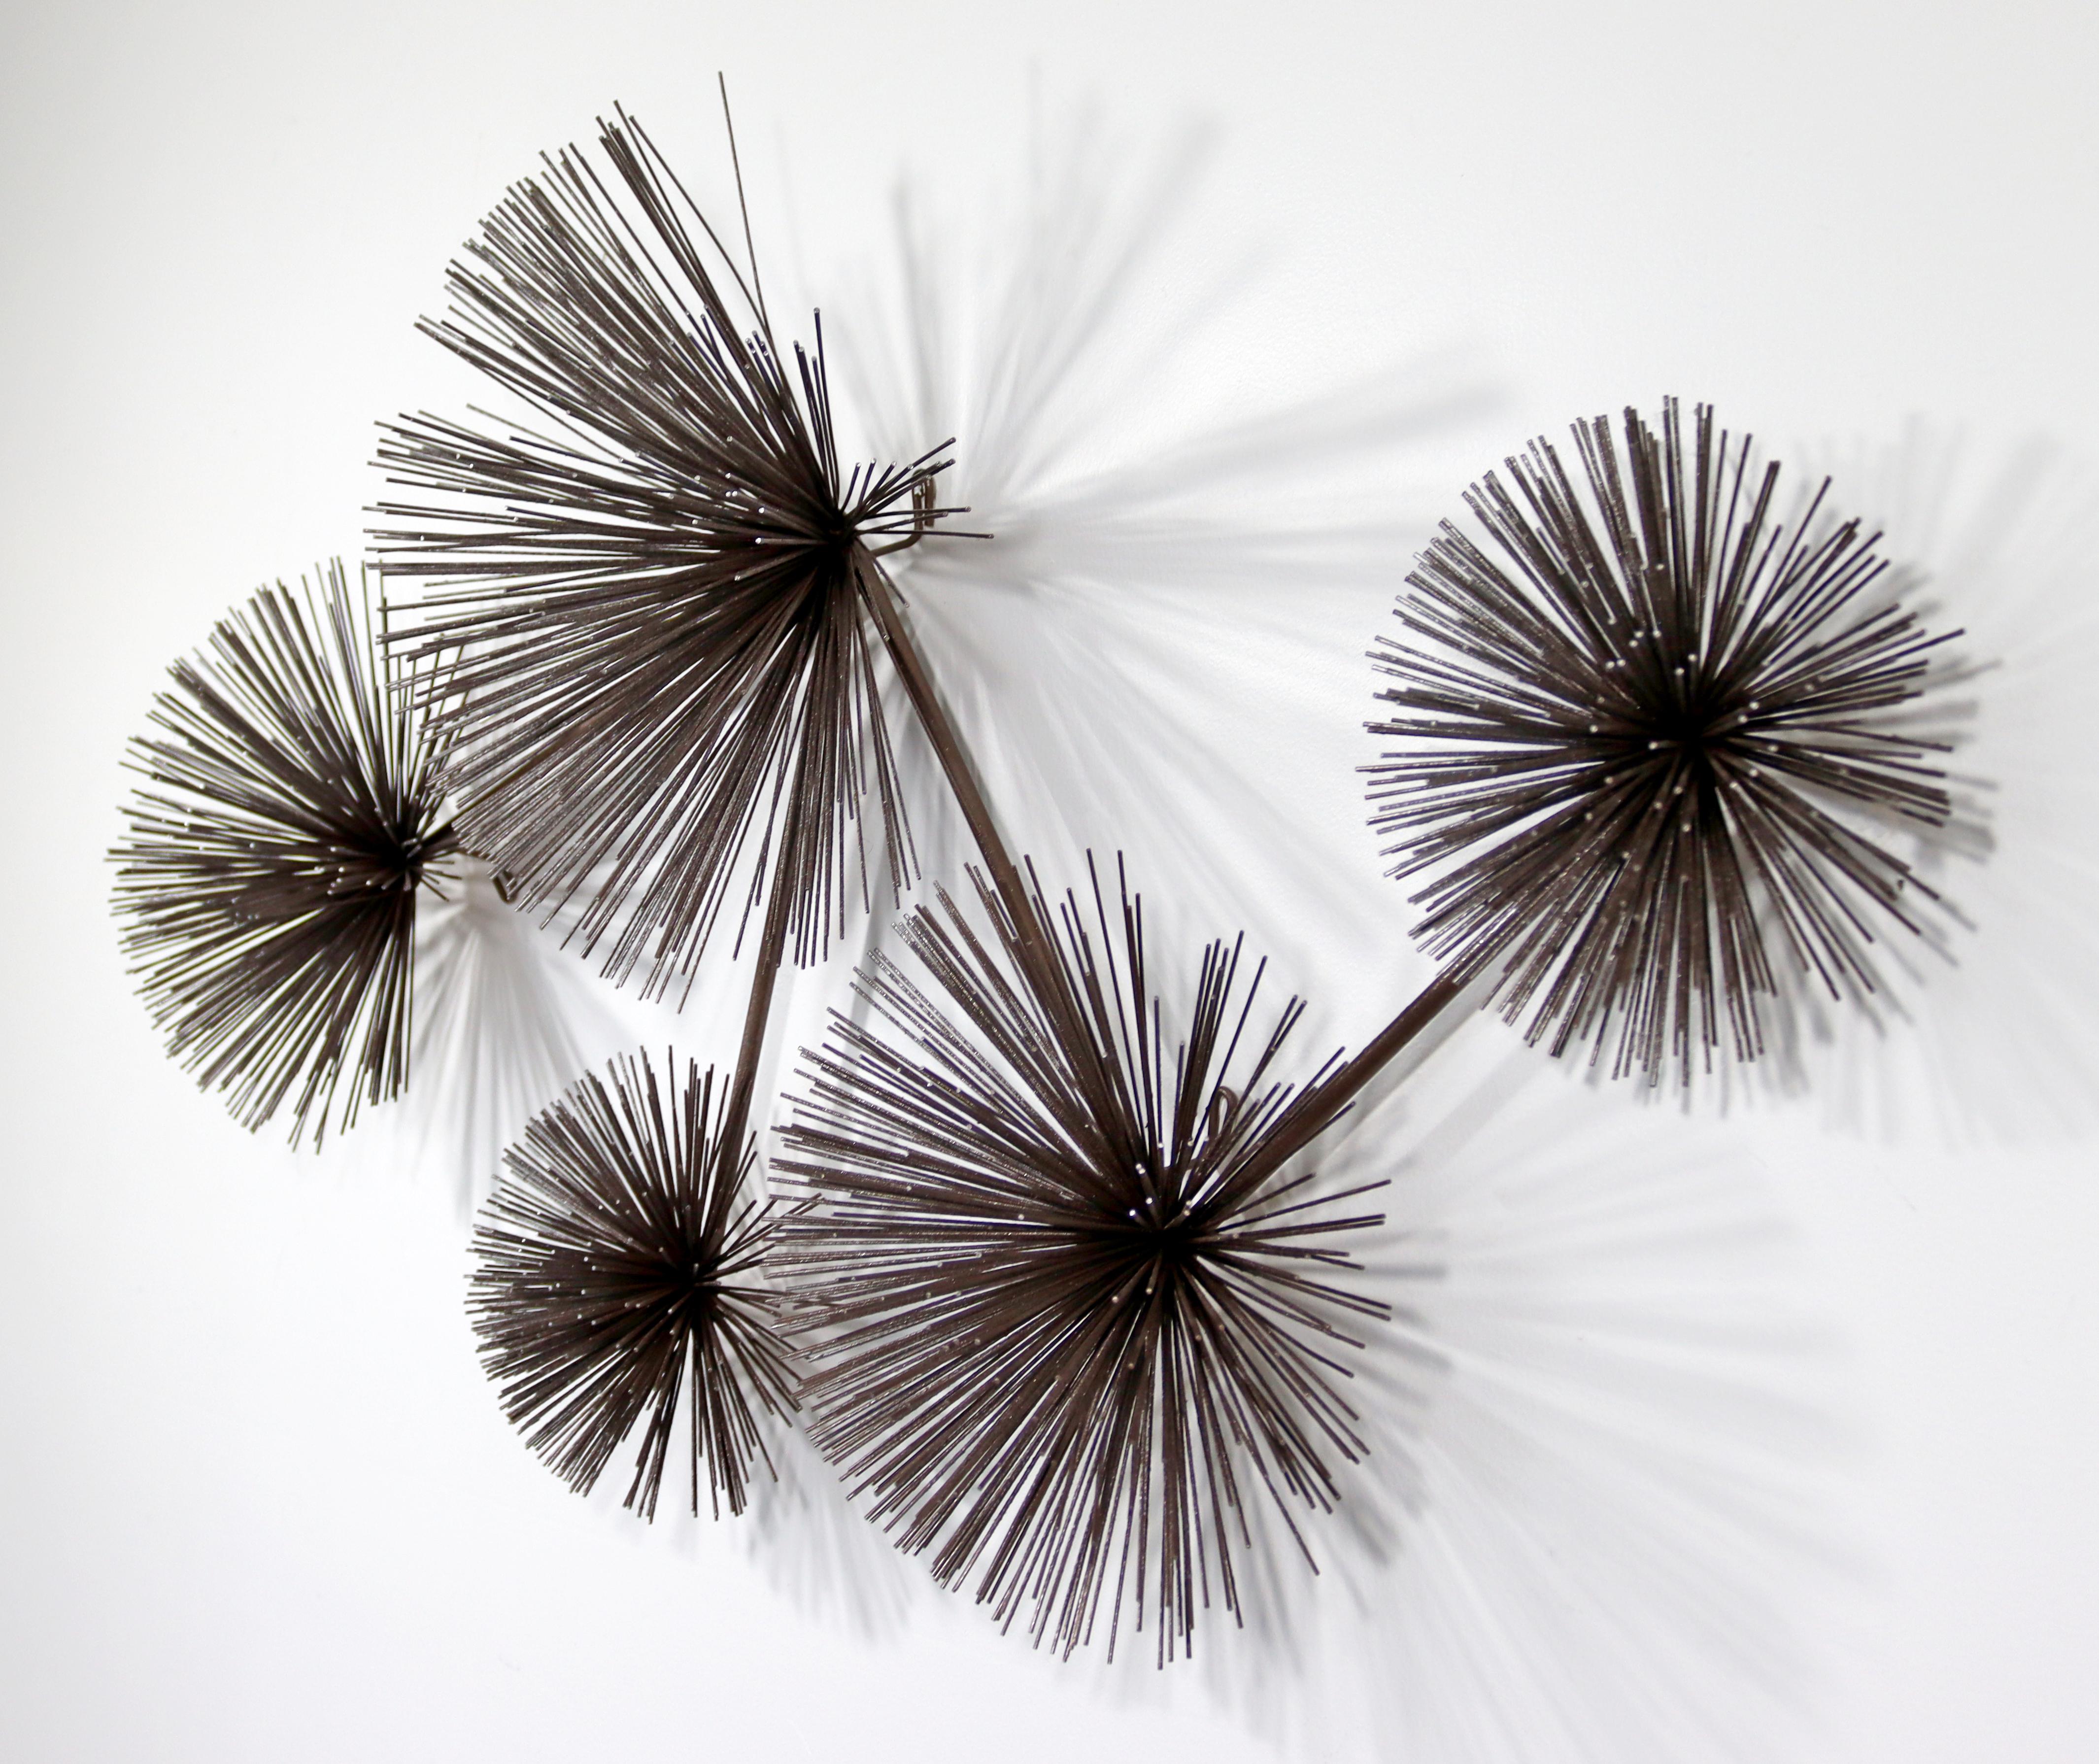 Late 20th Century Contemporary Modern Curtis Jere Gun Metal Wall Sculpture Poms 1980s For Sale